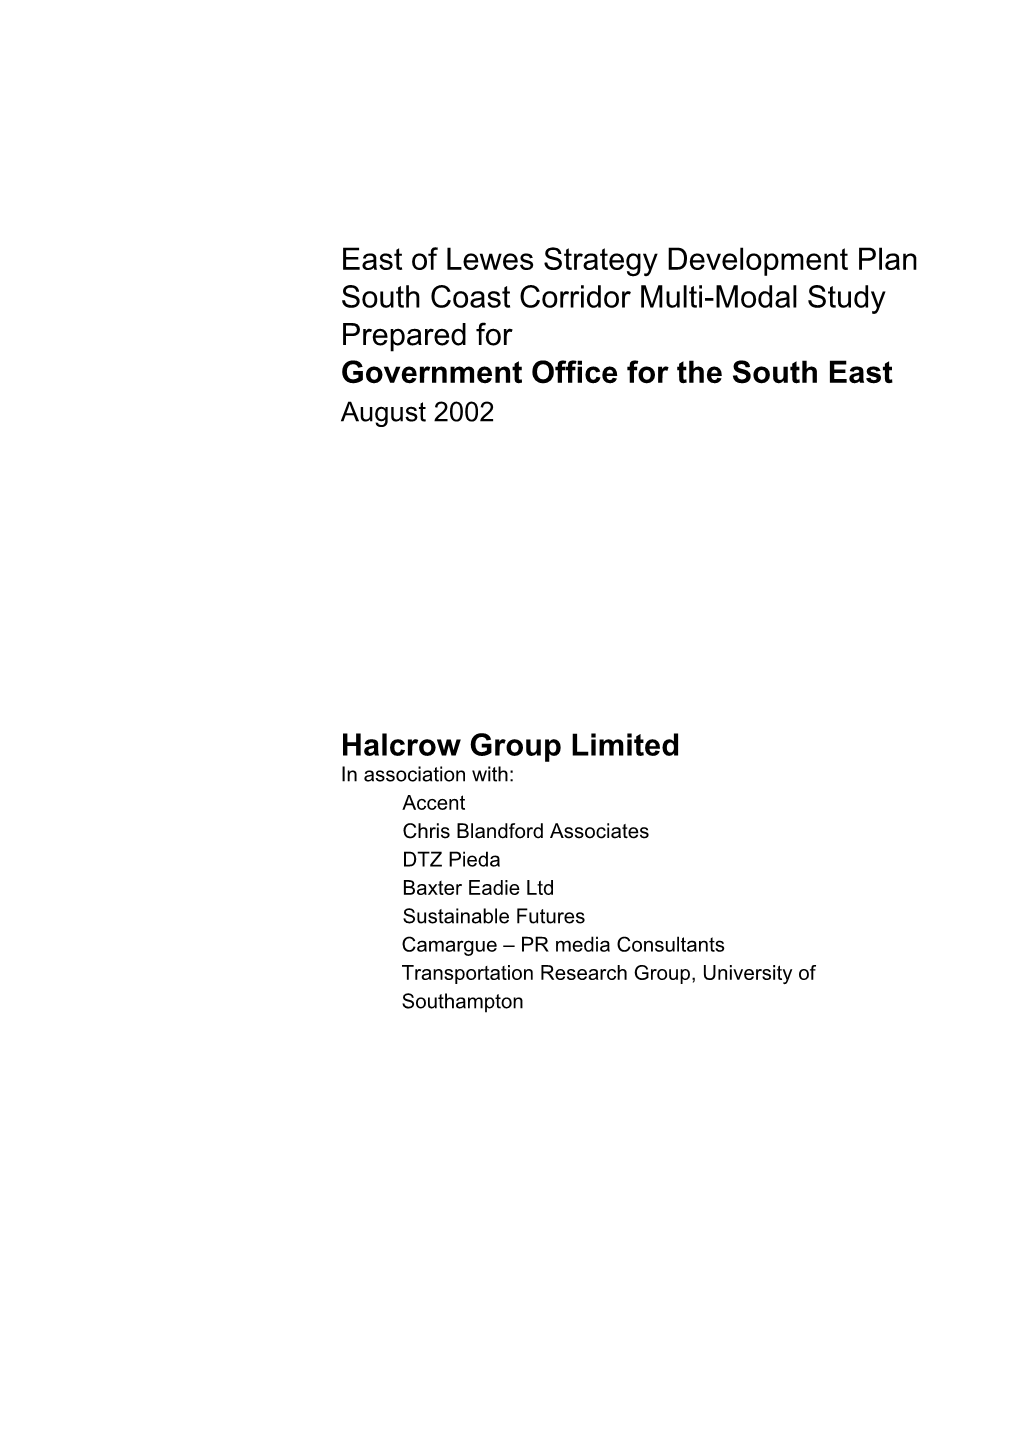 A27 East of Lewes Strategy Development Plan